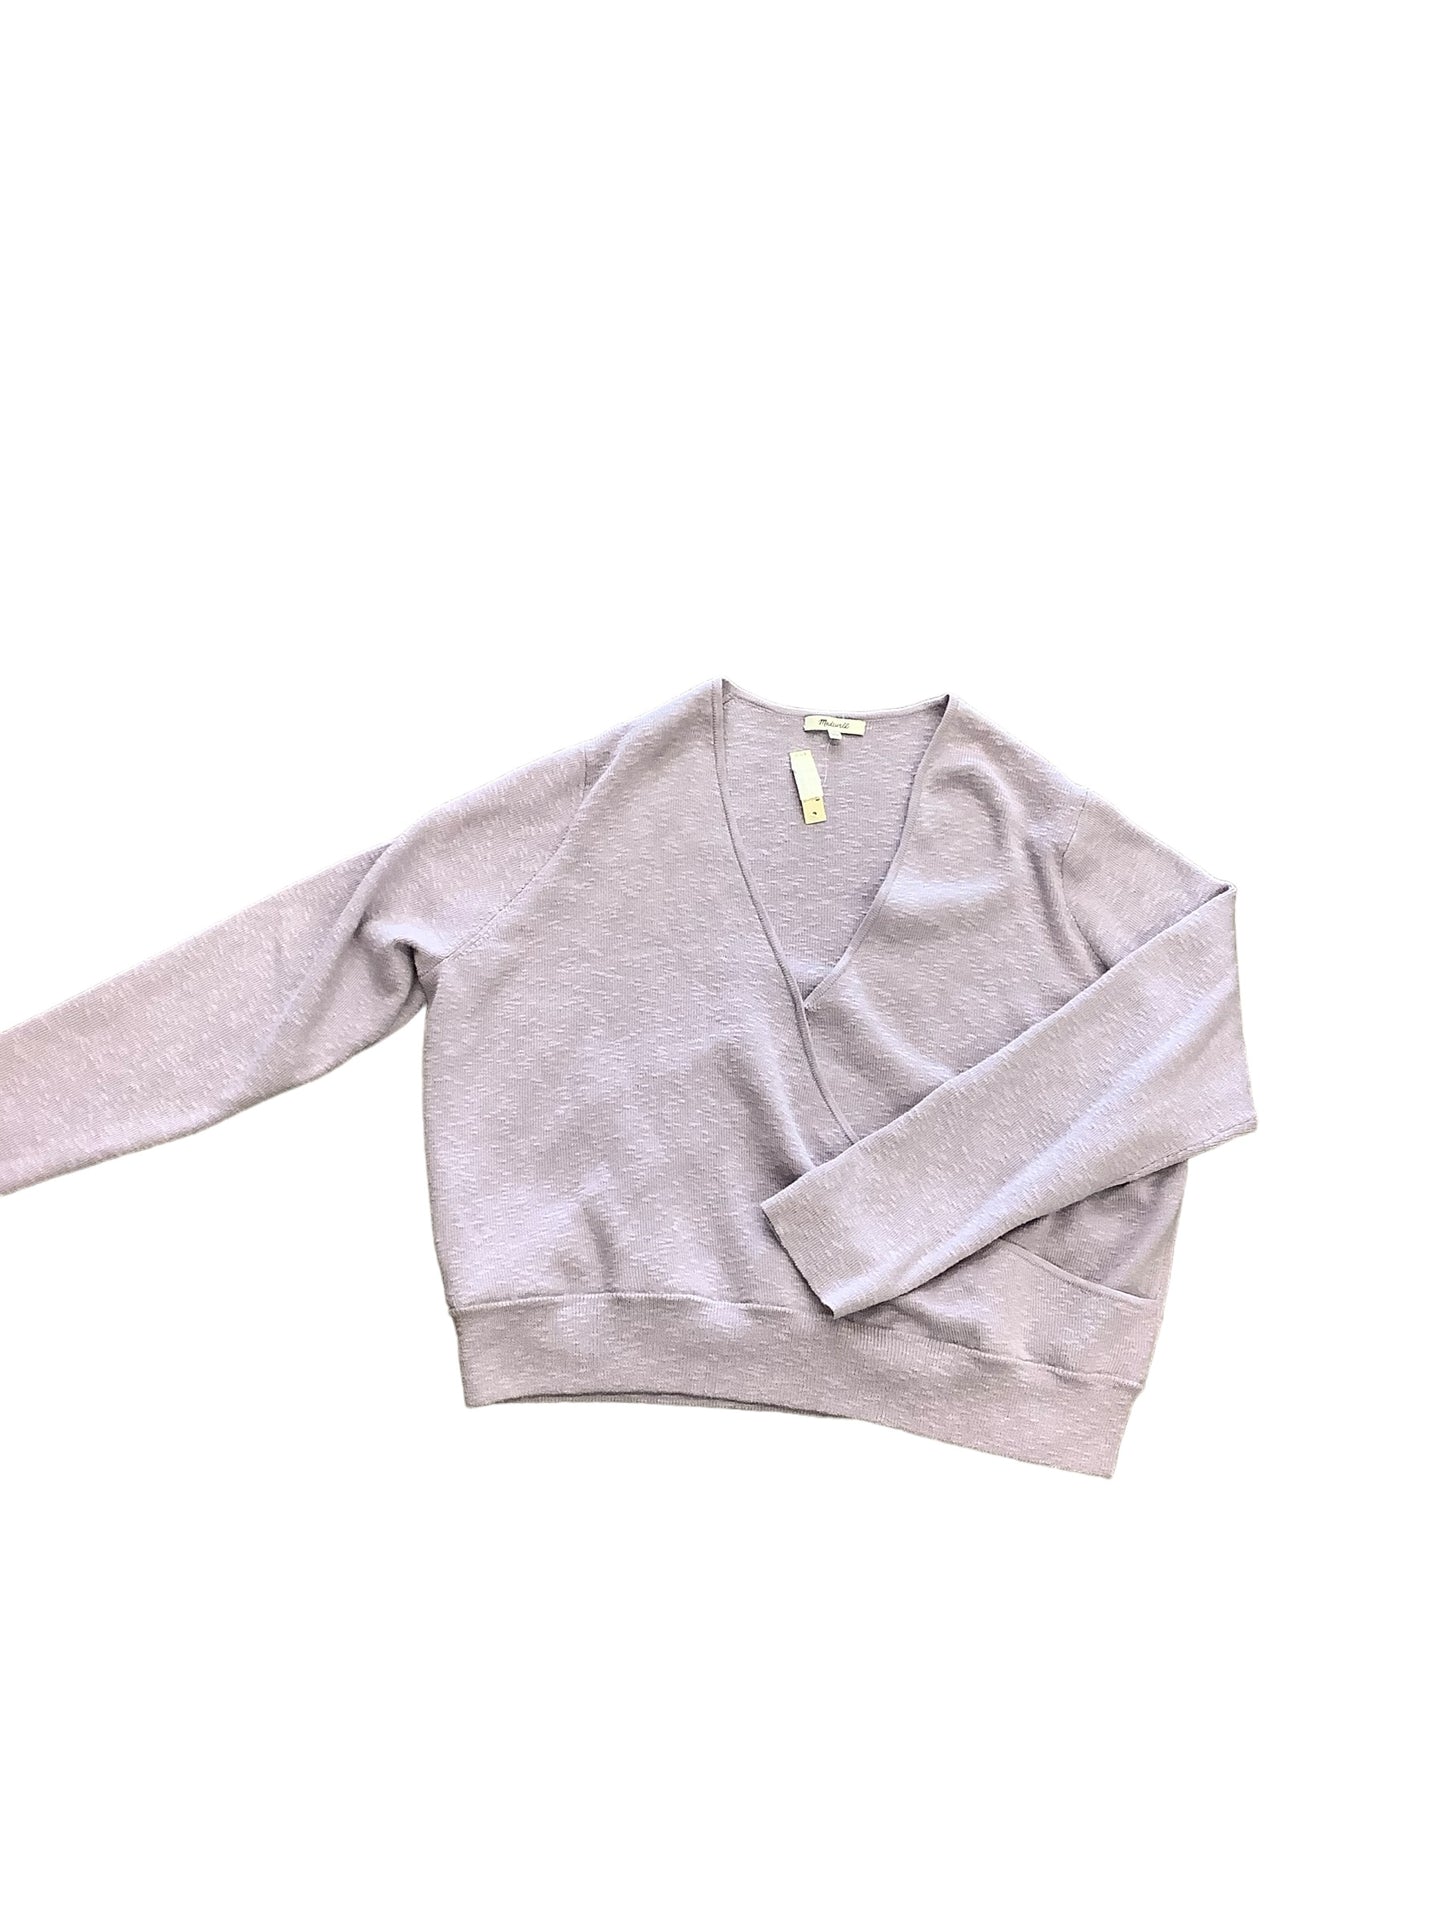 Top Long Sleeve By Madewell  Size: 3x